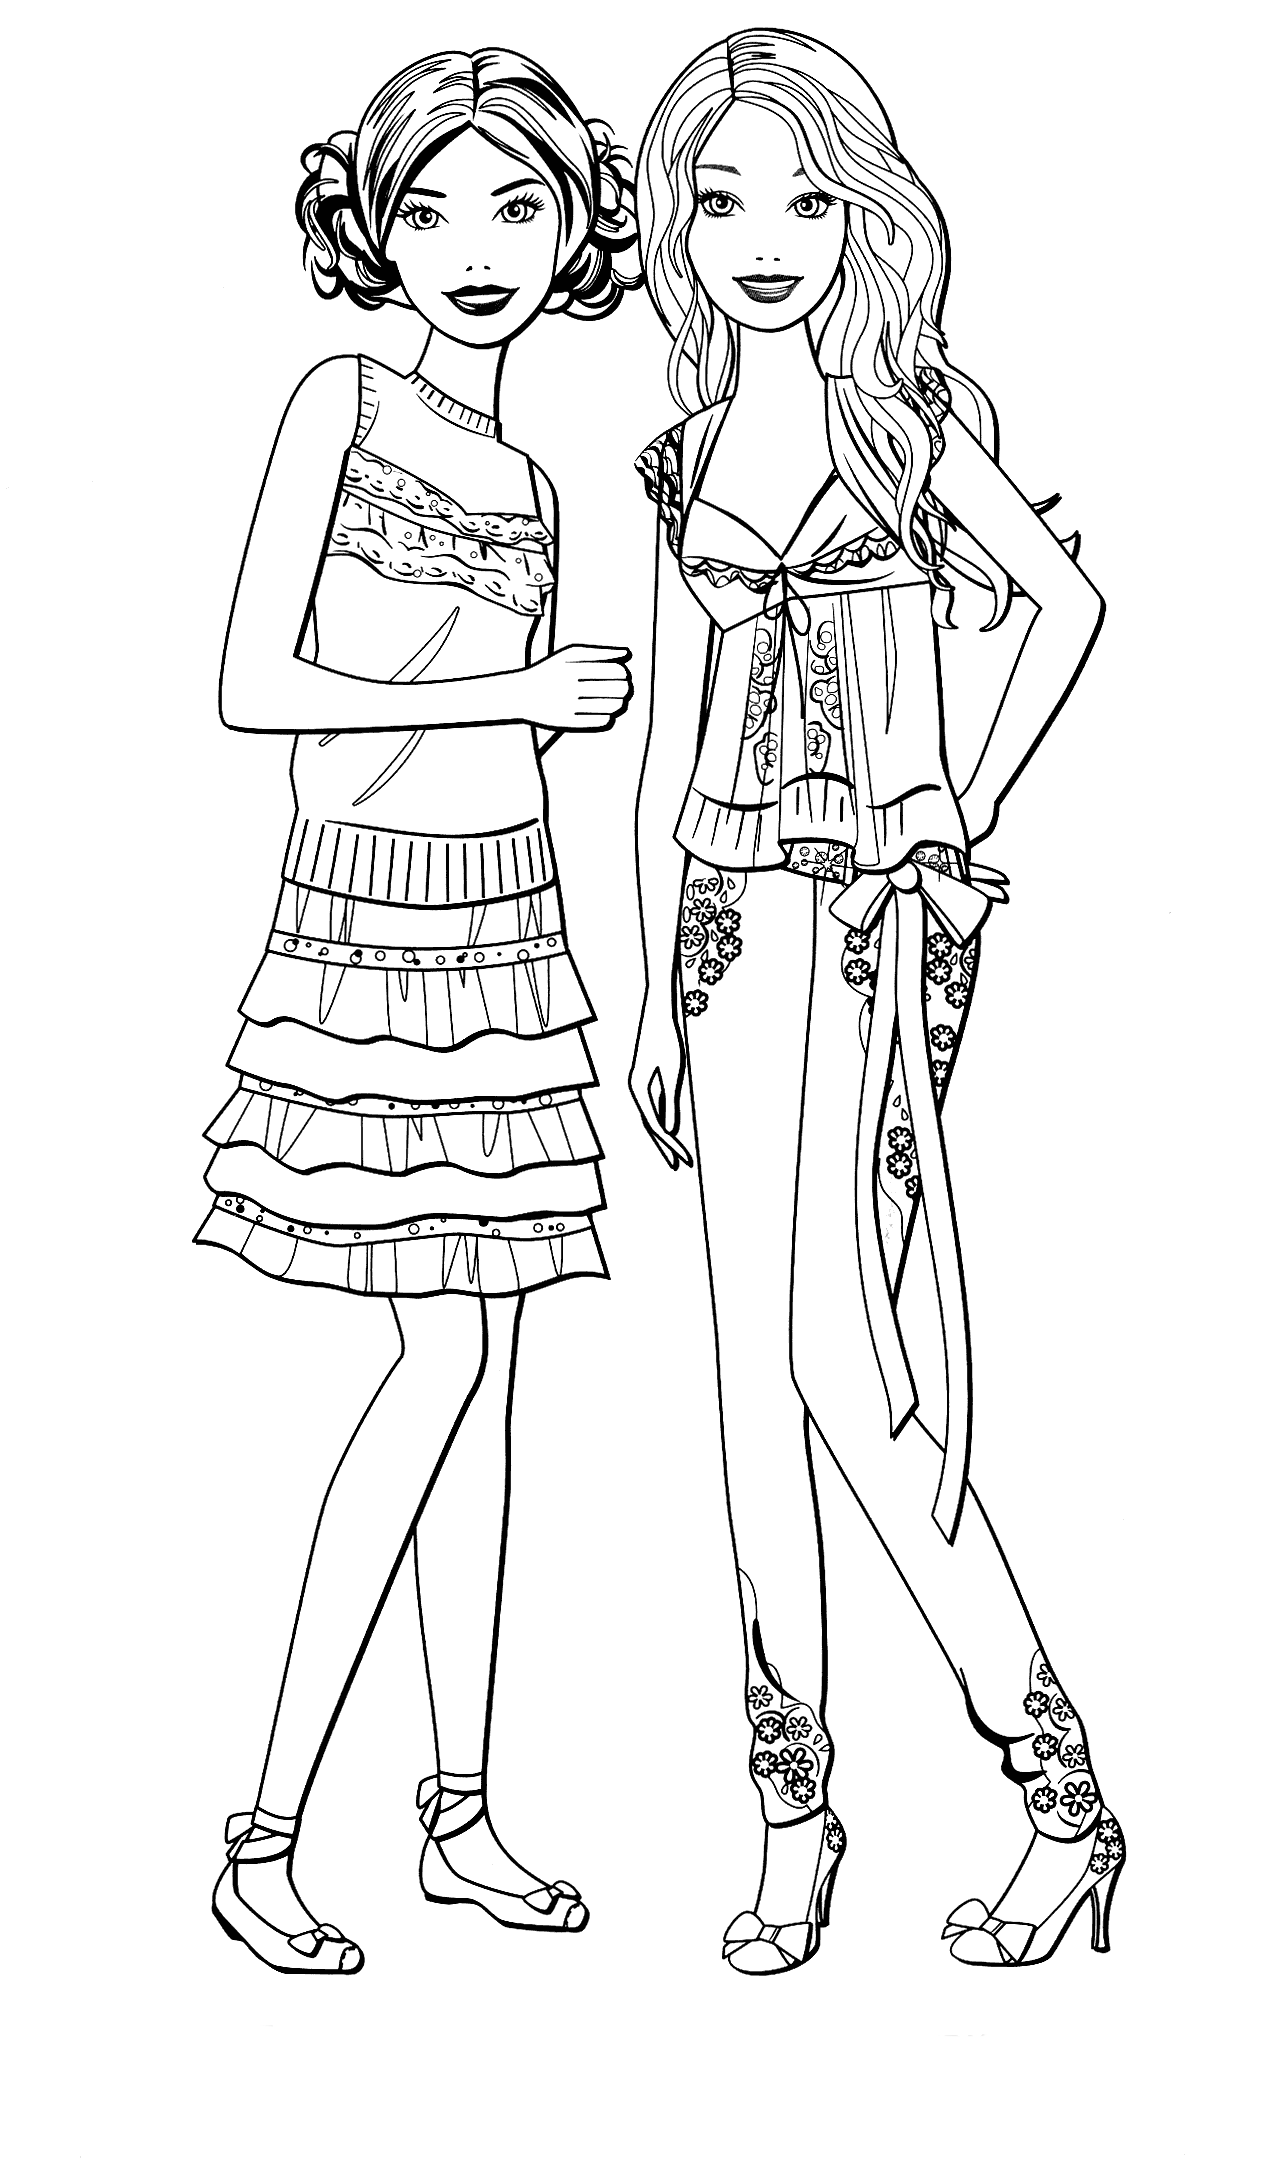 Printable Barbie And Friends Coloring Pages Pdf - Printable Barbie And Friends Coloring Pages